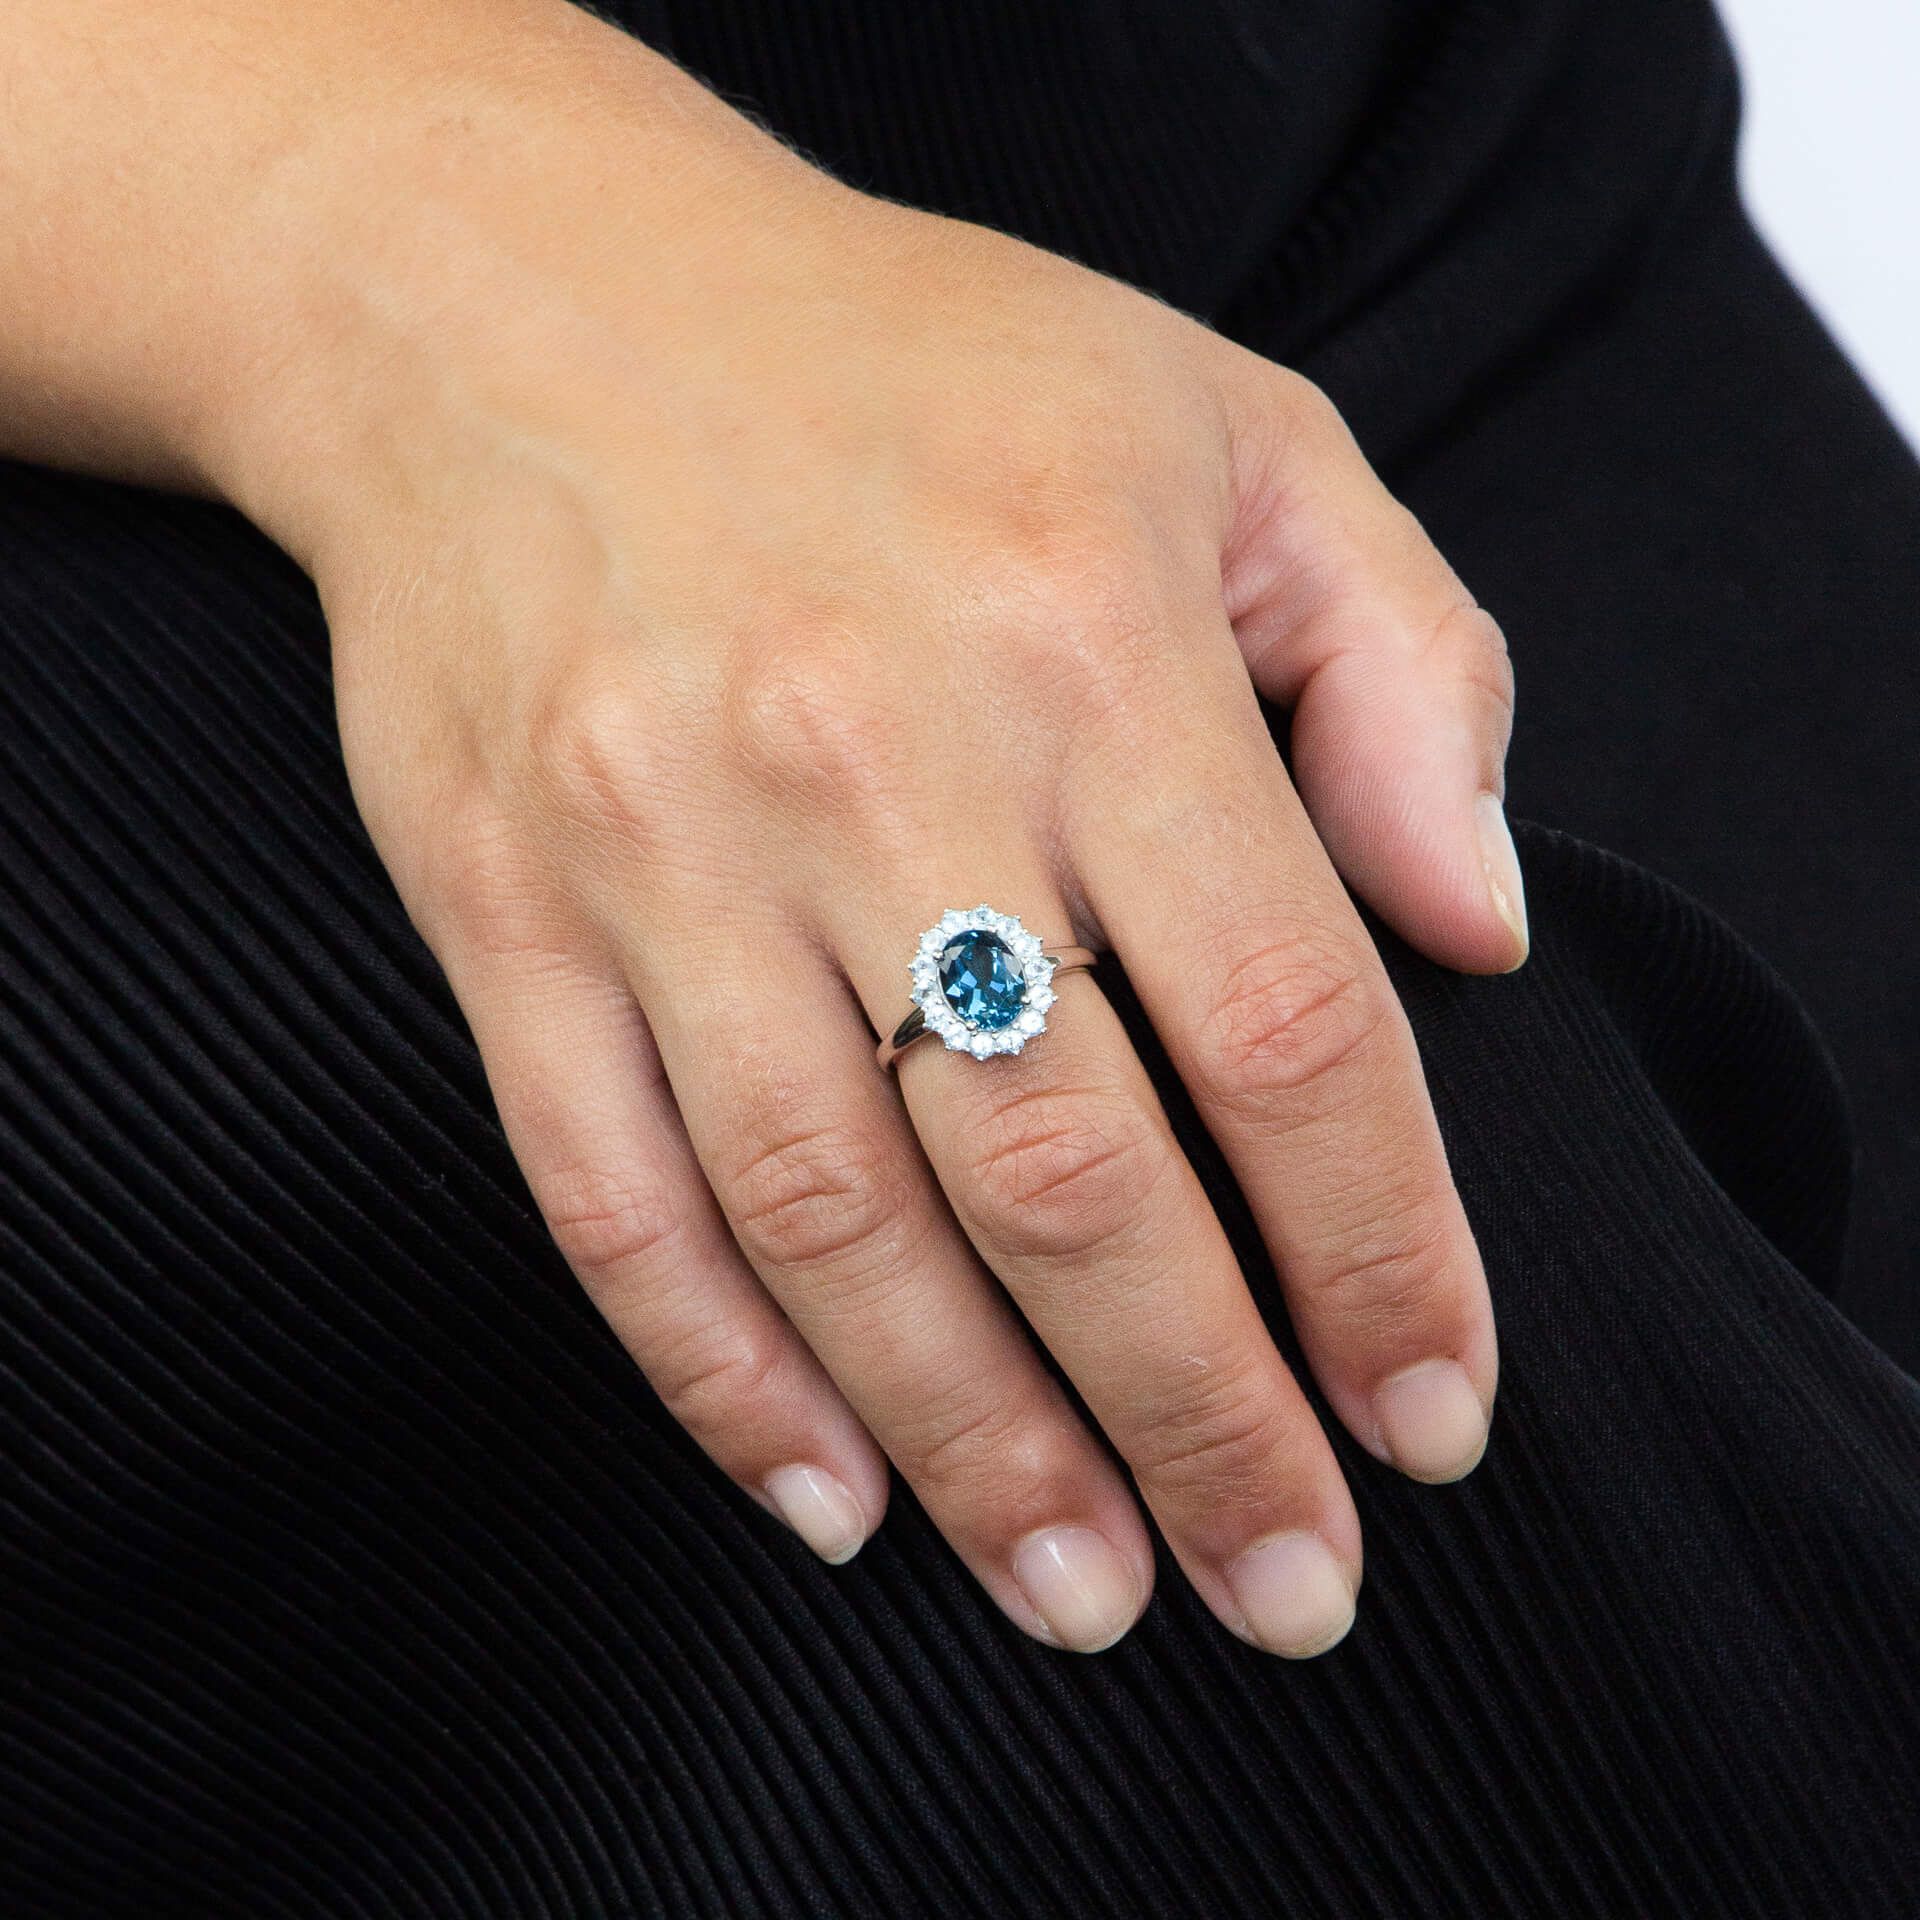 Statement Blue Topaz Ring in 9ct White Gold